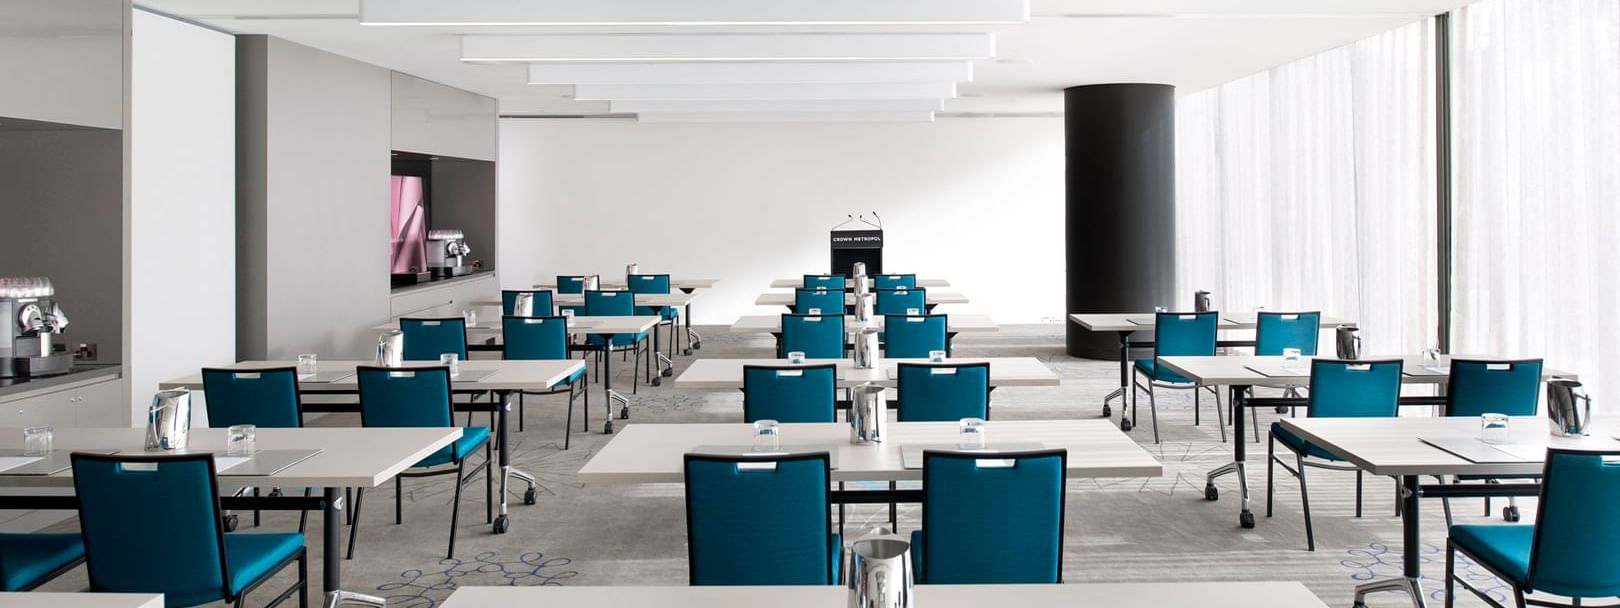 Classroom set-up in a Meeting Room at Crown Hotel Melbourne